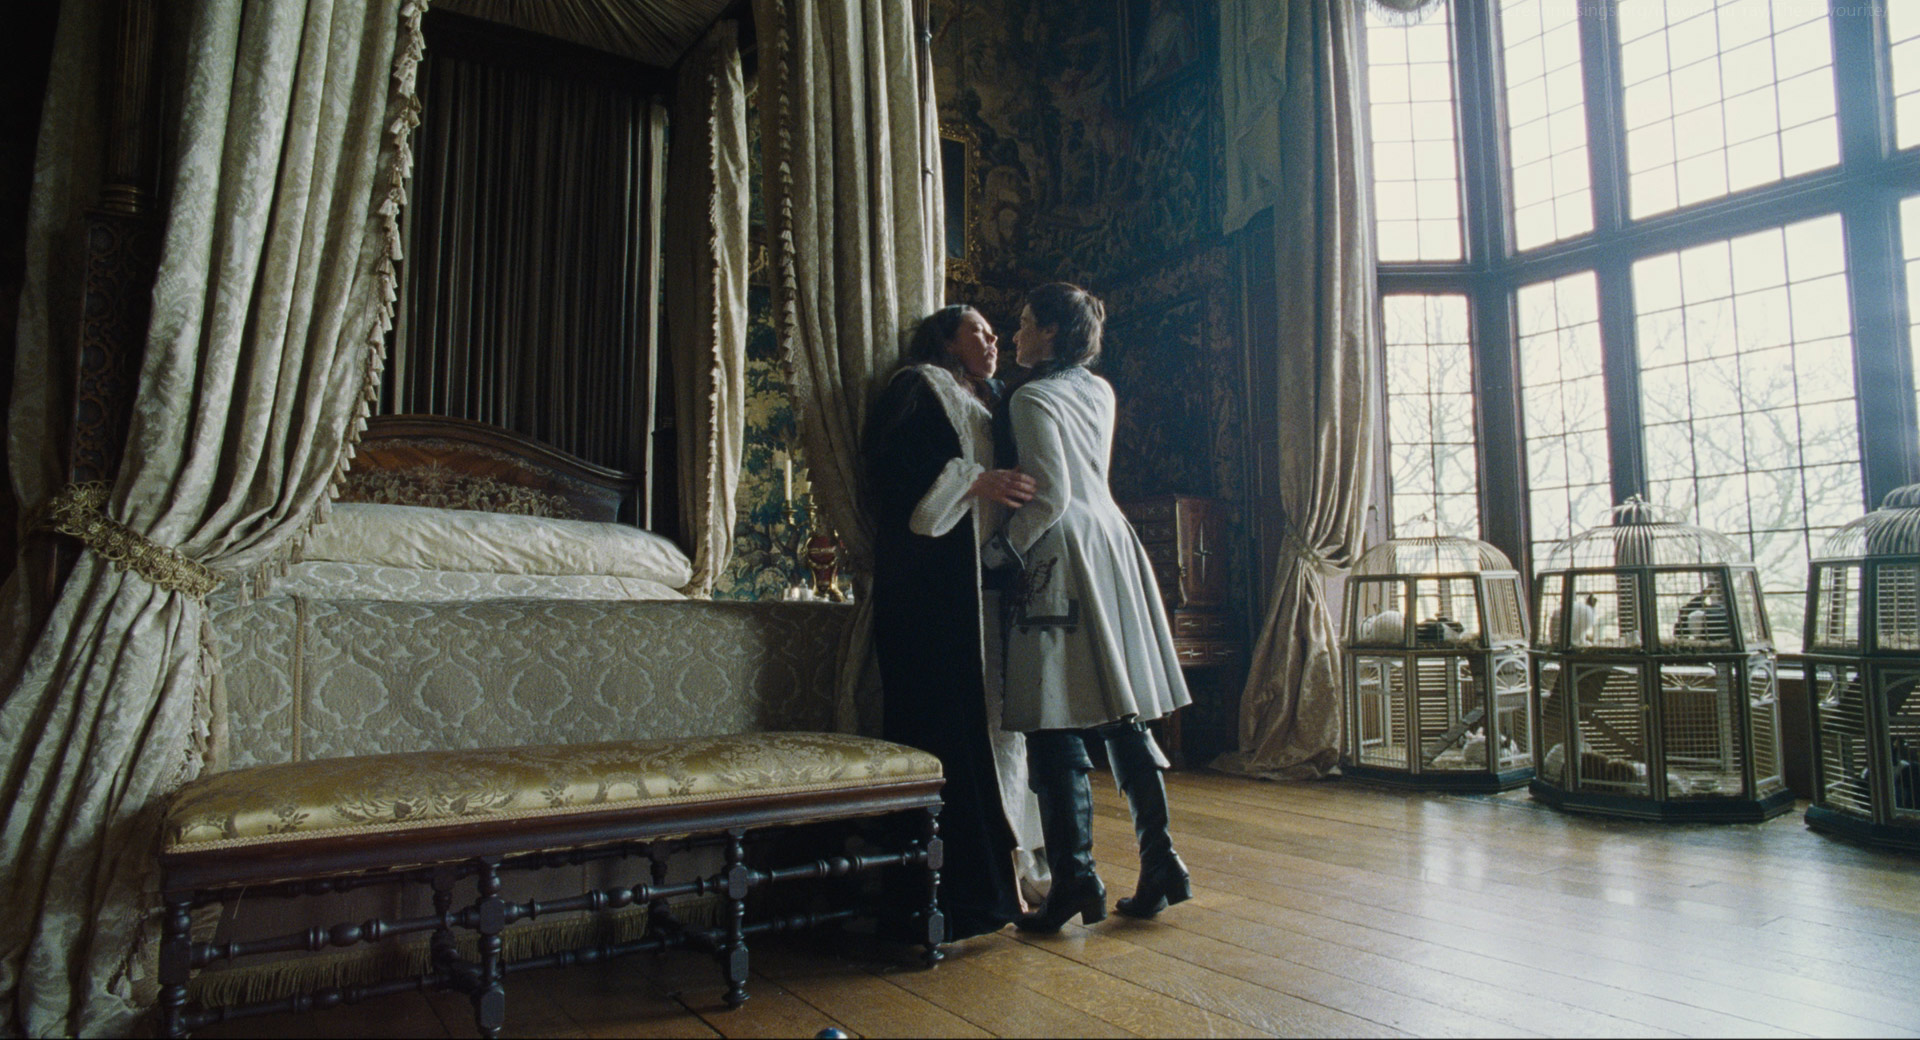 The Favourite (2018)